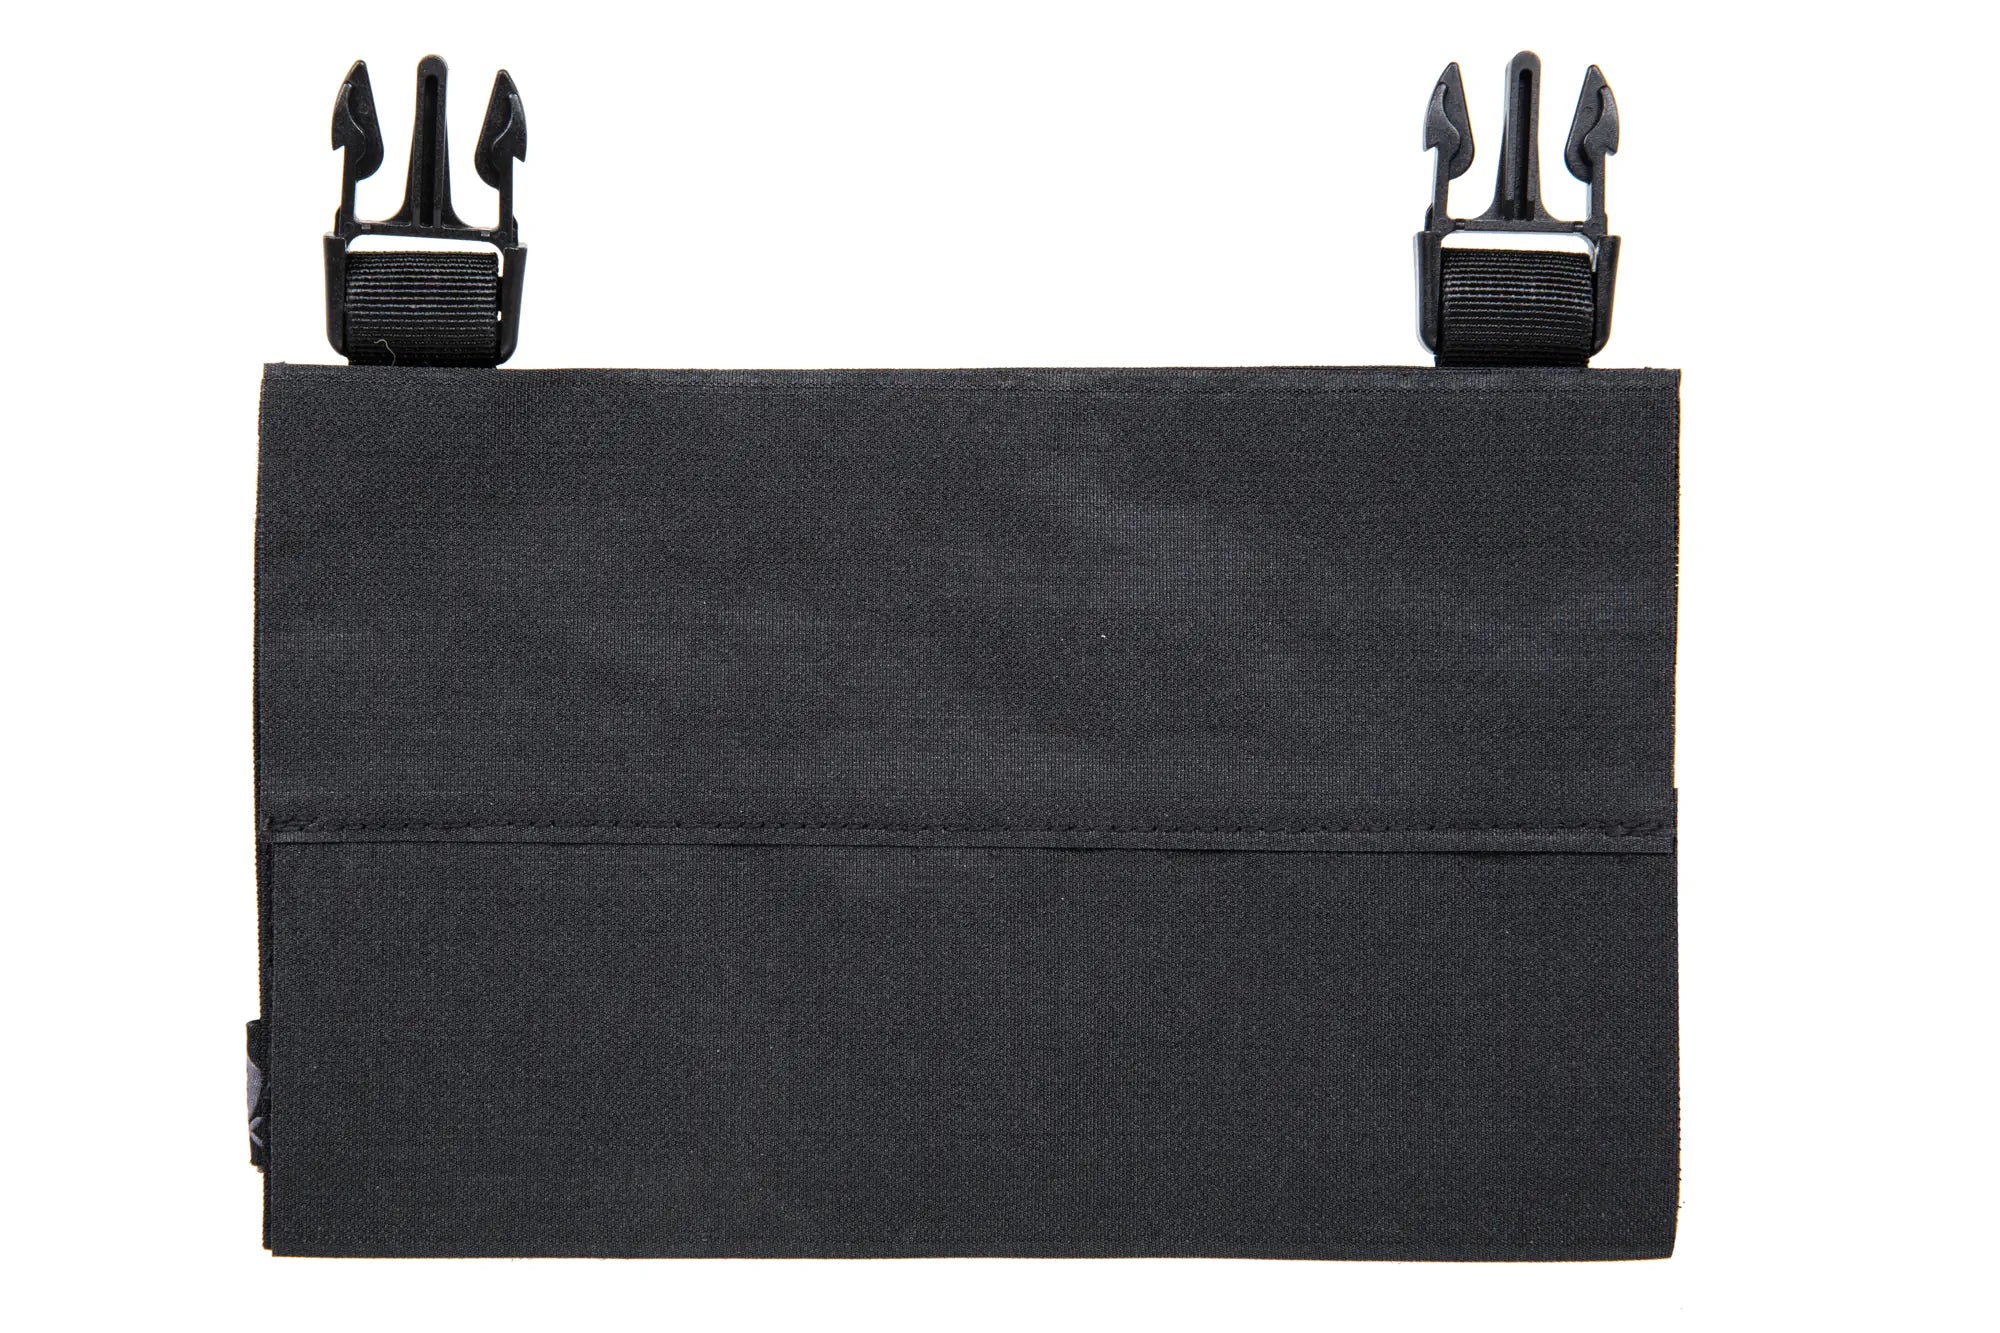 Viper Tactical VX buckle up panel for 3 AR/AK magazines - Black